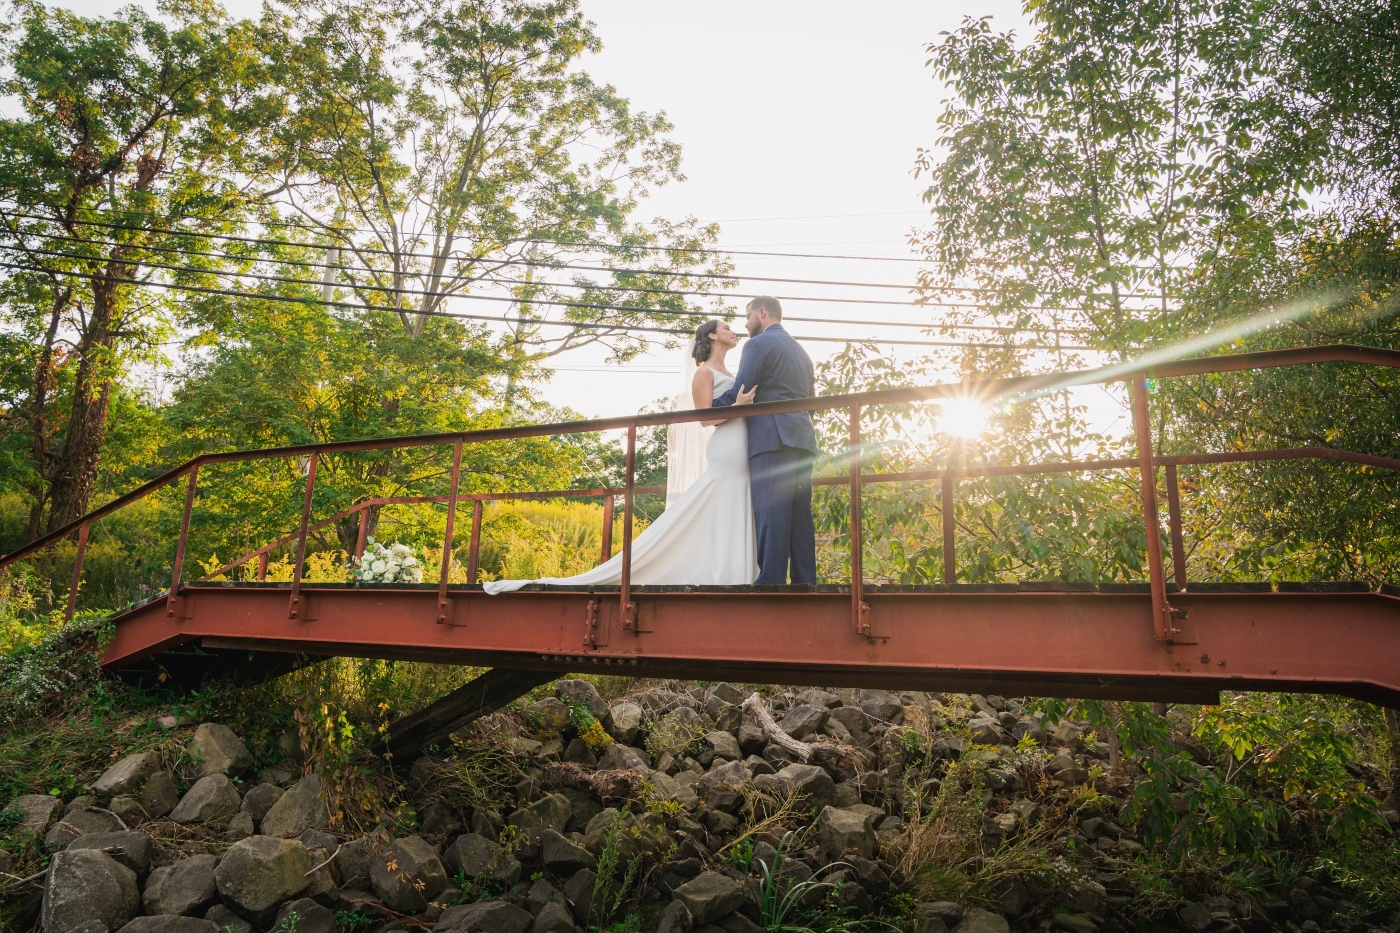 Michaela + Andrew at The Tanglewood Club in Chagrin Falls, Ohio